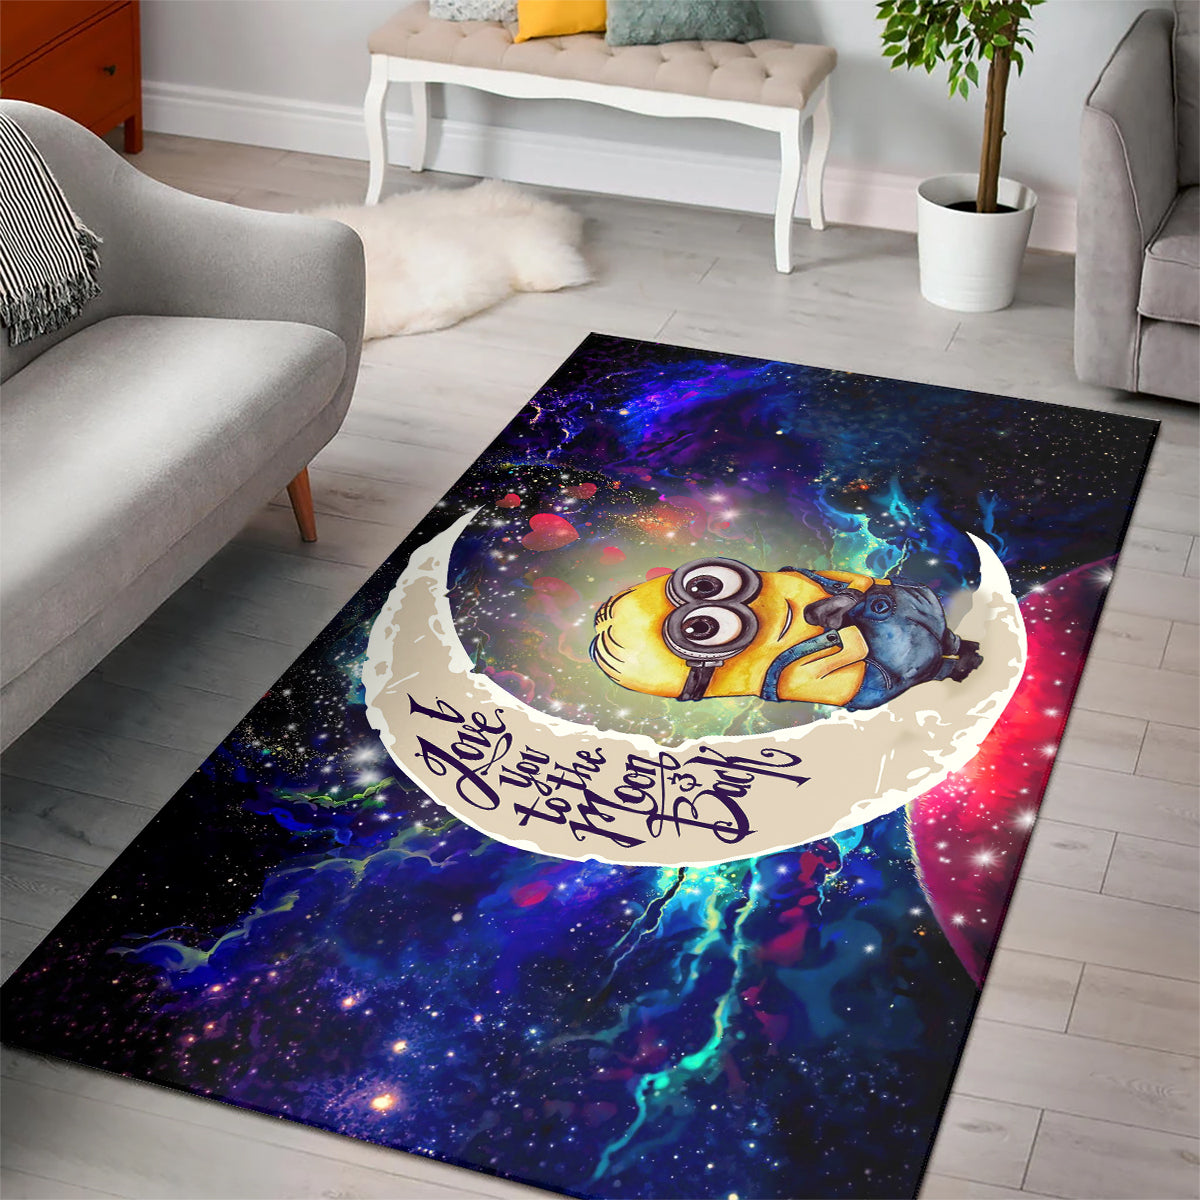 Cute Minions Despicable Me Love You To The Moon Galaxy Carpet Rug Home Room Decor